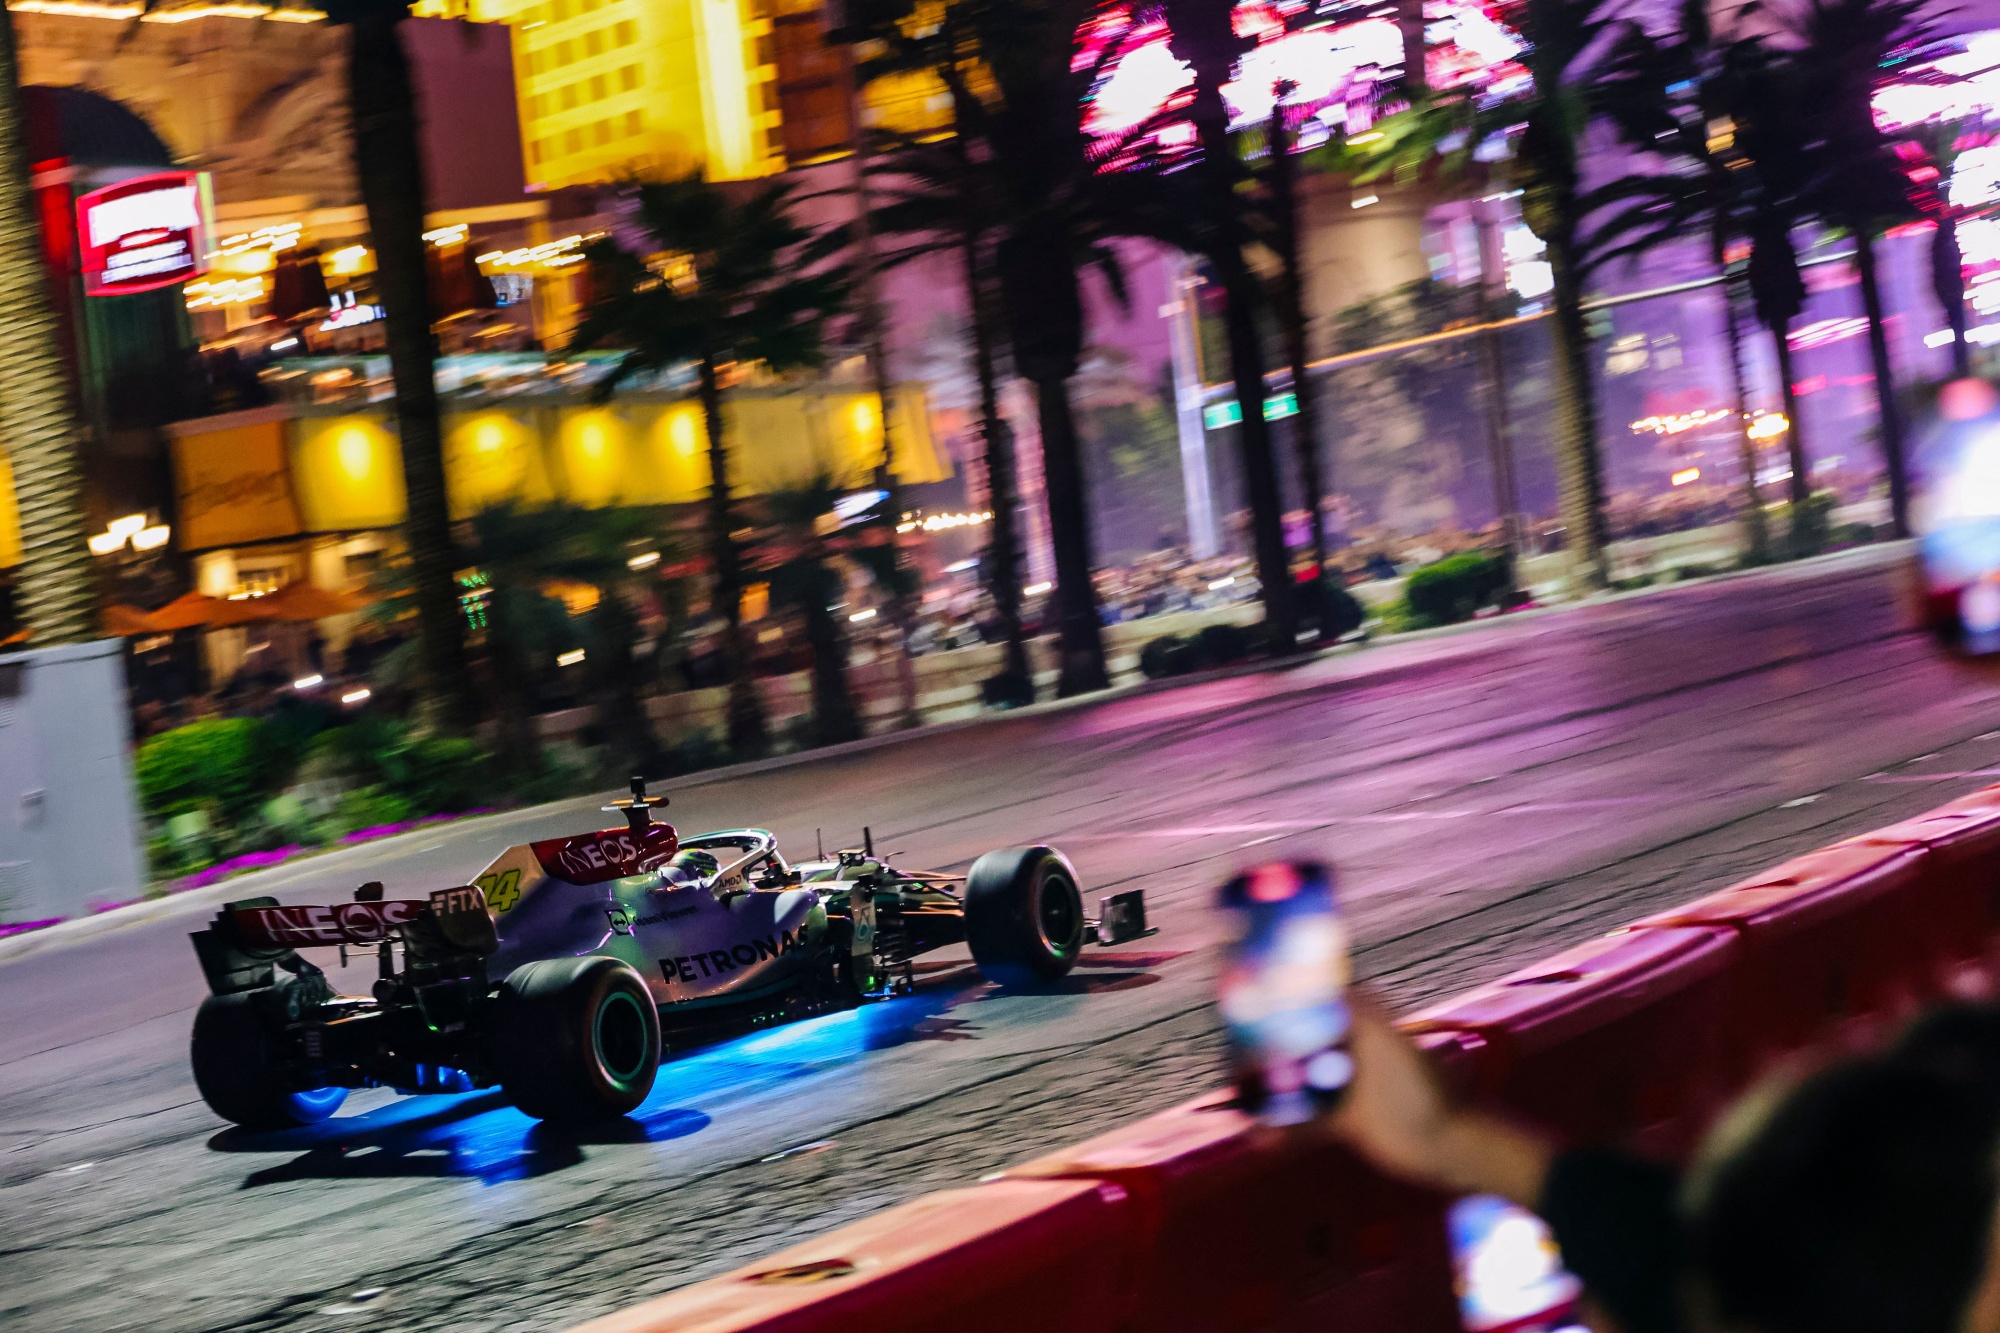 Bellagio Sells $11,247 Tickets to Private Cub at F1 Las Vegas - Bloomberg